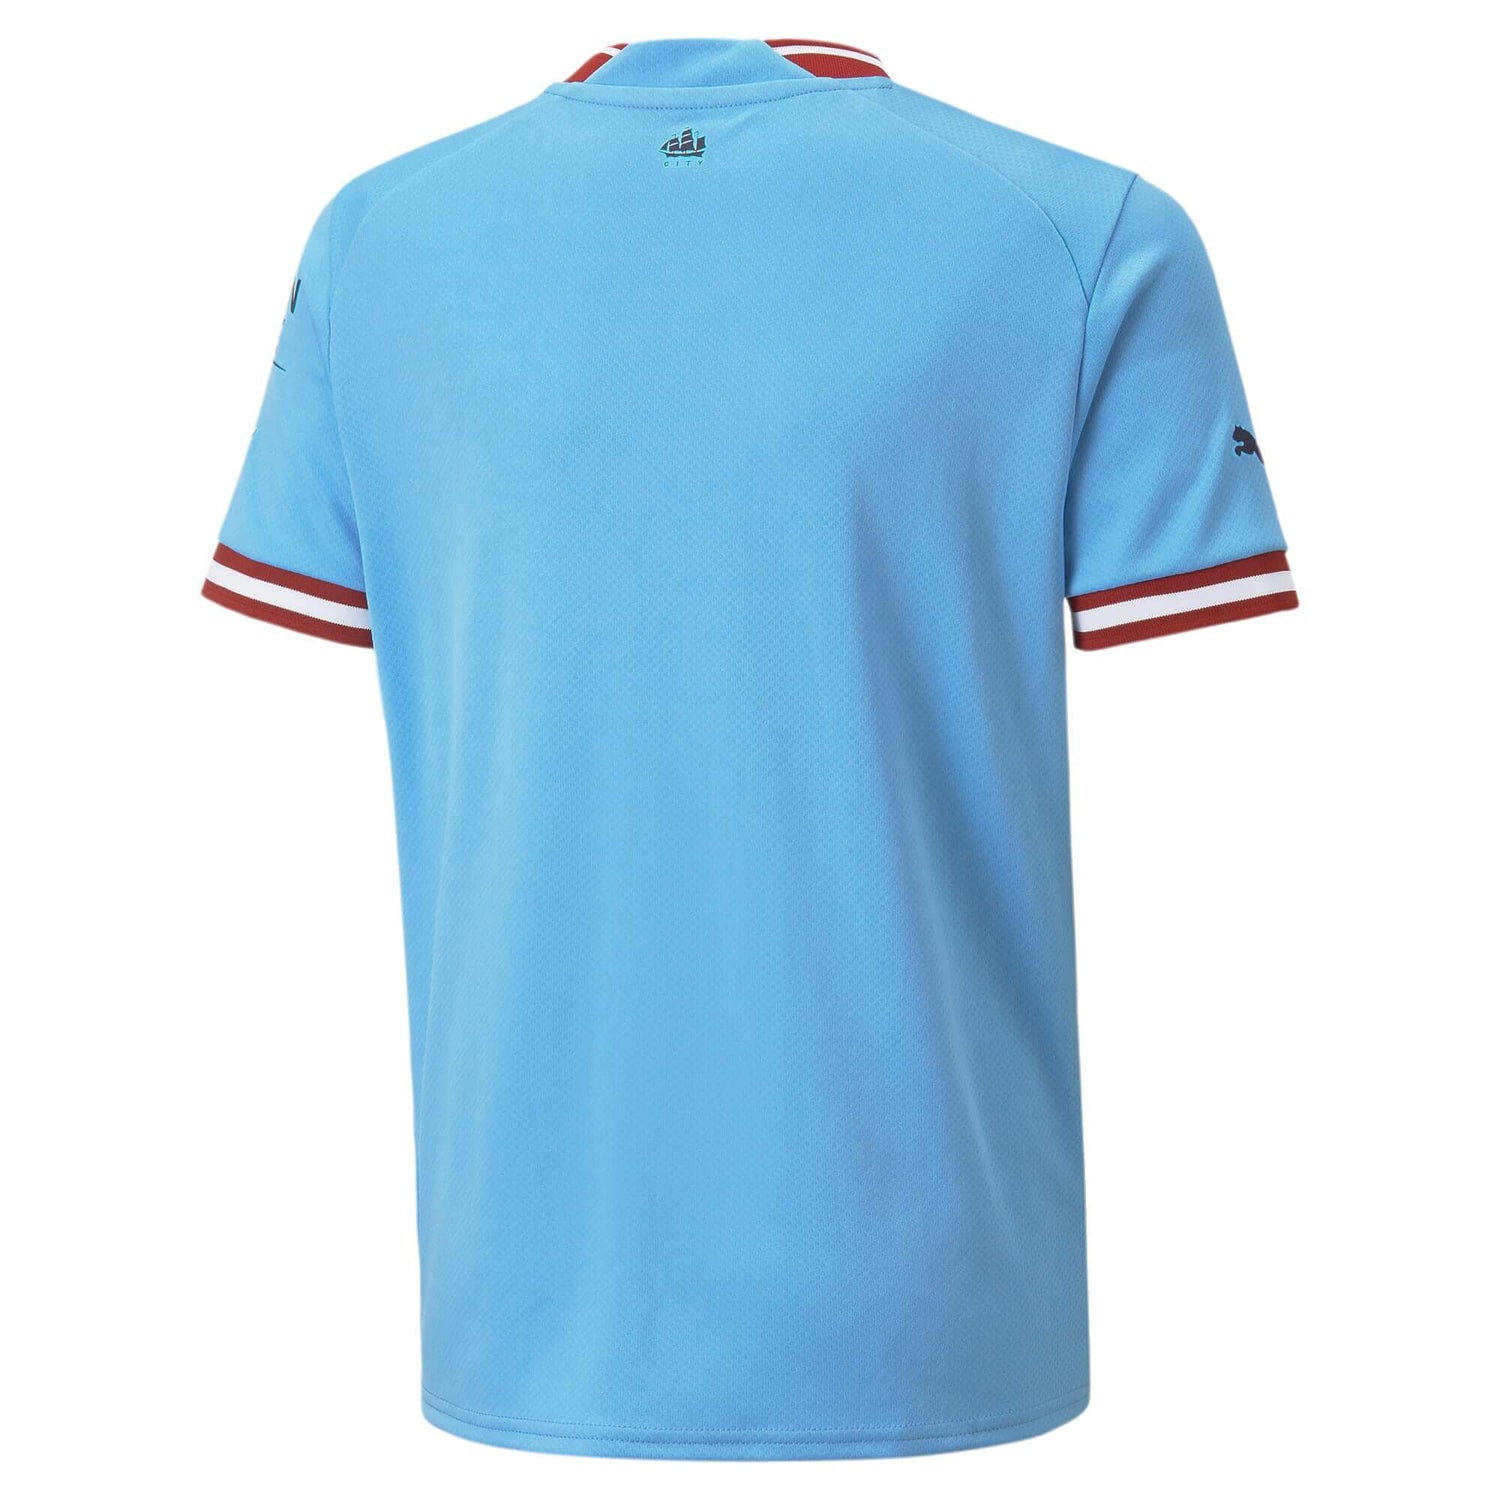 Puma 2022-23 Manchester City Youth Home Jersey - Light Blue-Intense Red (Back)